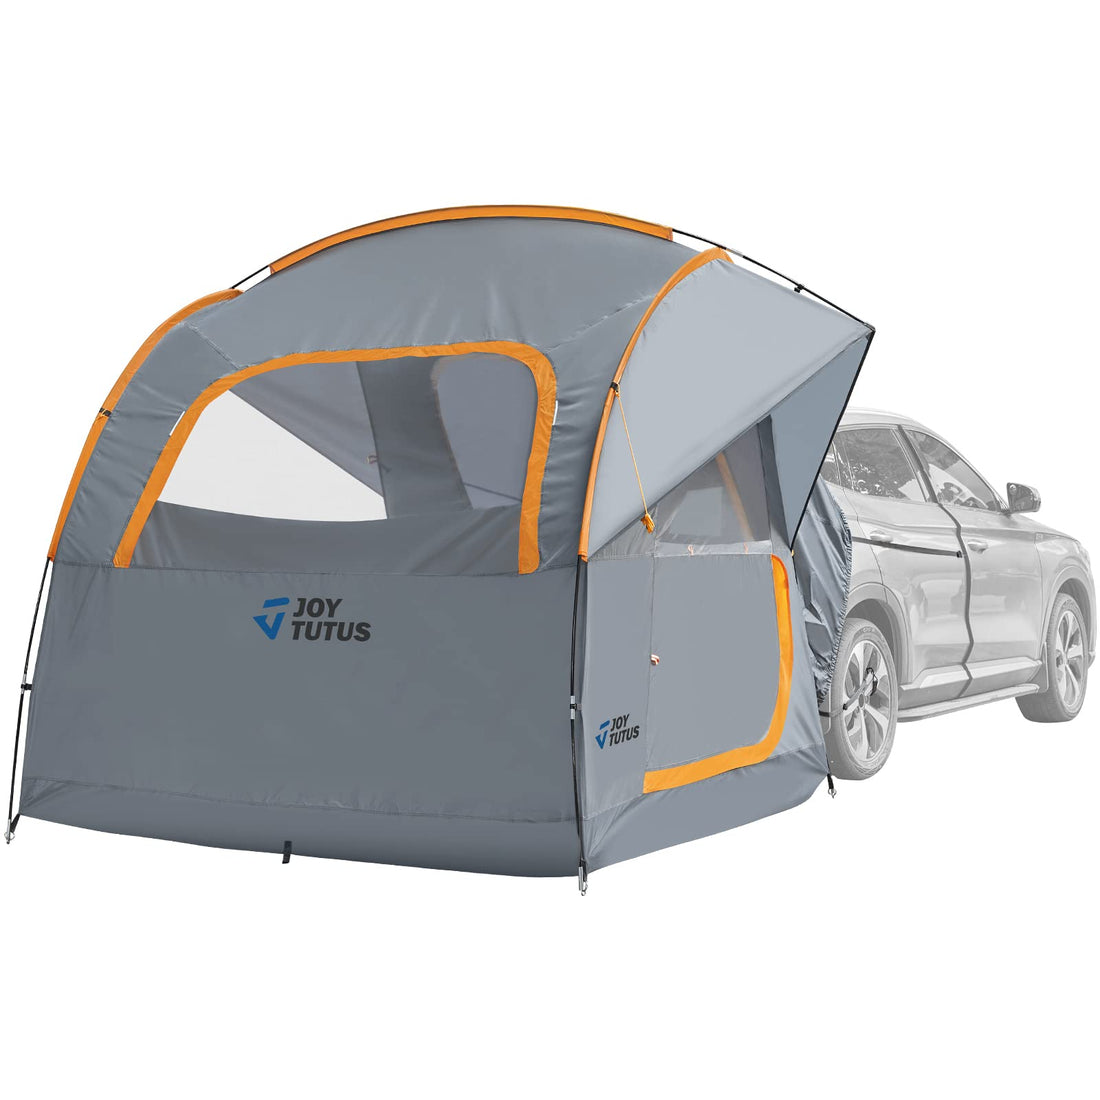 SUV Tent for Camping for 6-8 Person,Camping Outdoor Travel Preferred, Orange